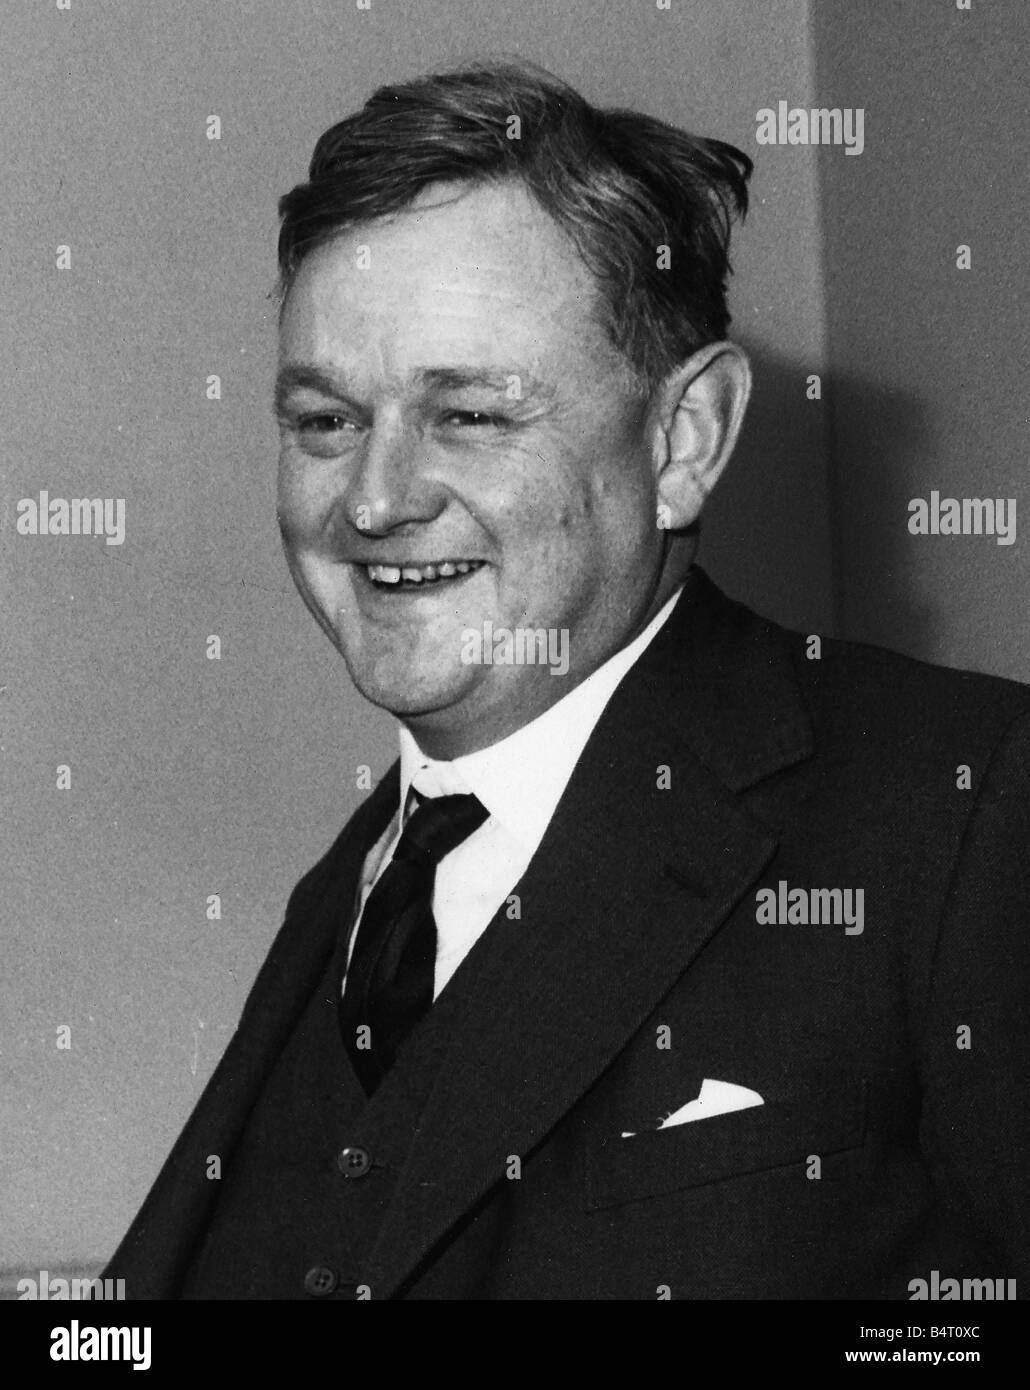 Suez Crisis Lord Hailsham Chairman of the Consevative Party 1957 First Lord of the Admiralty during the Suez Crisis Stock Photo